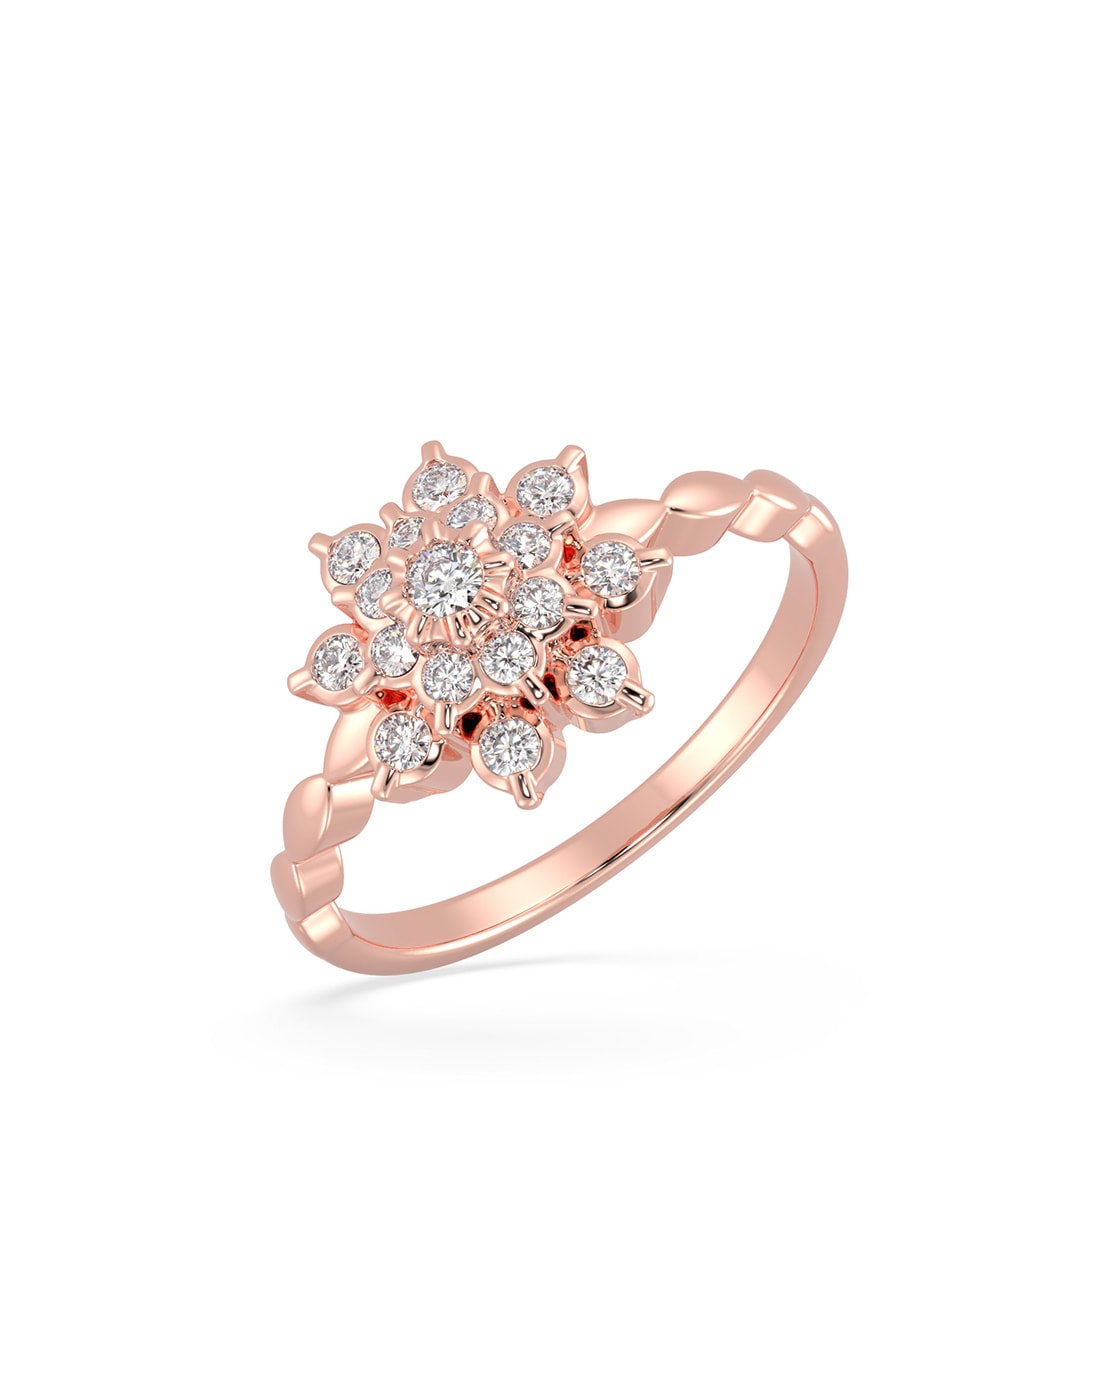 14K Rose Gold Twisted Round Diamond Engagement Ring | Koerbers Fine Jewelry  Inc | New Albany, IN